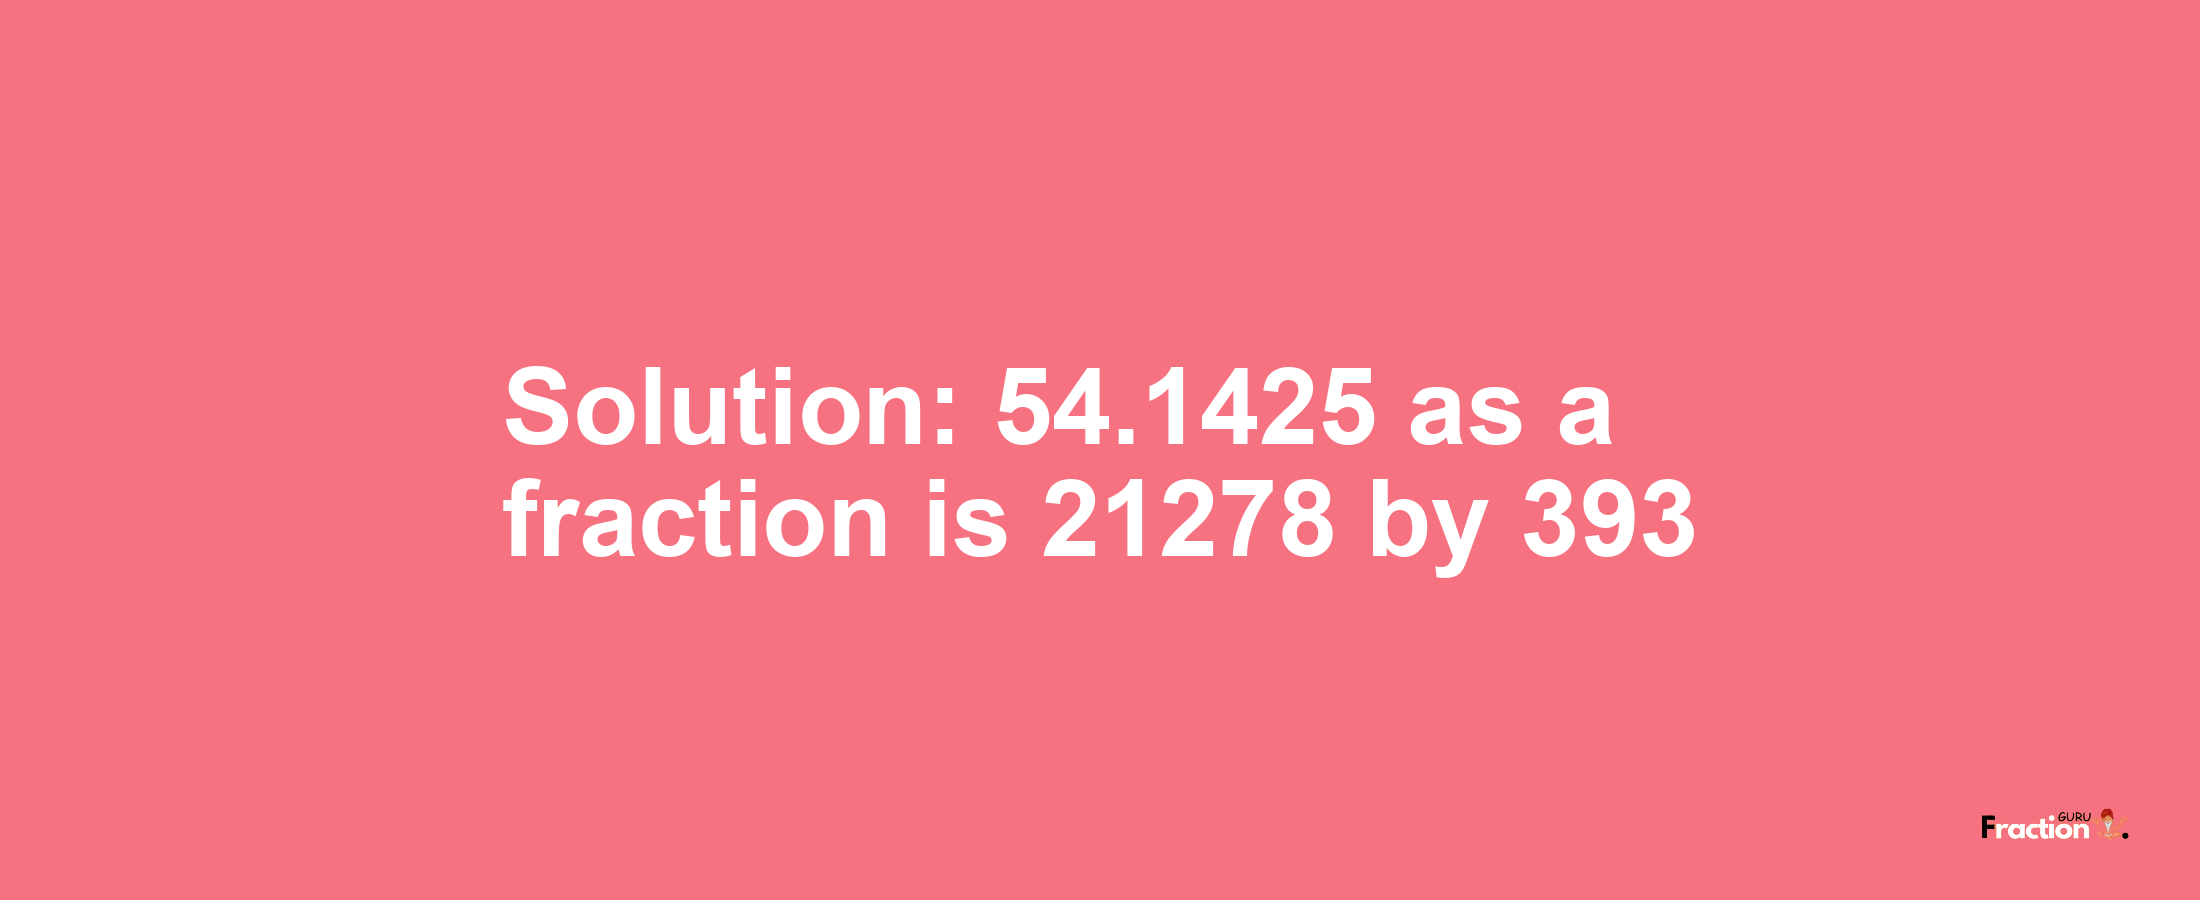 Solution:54.1425 as a fraction is 21278/393